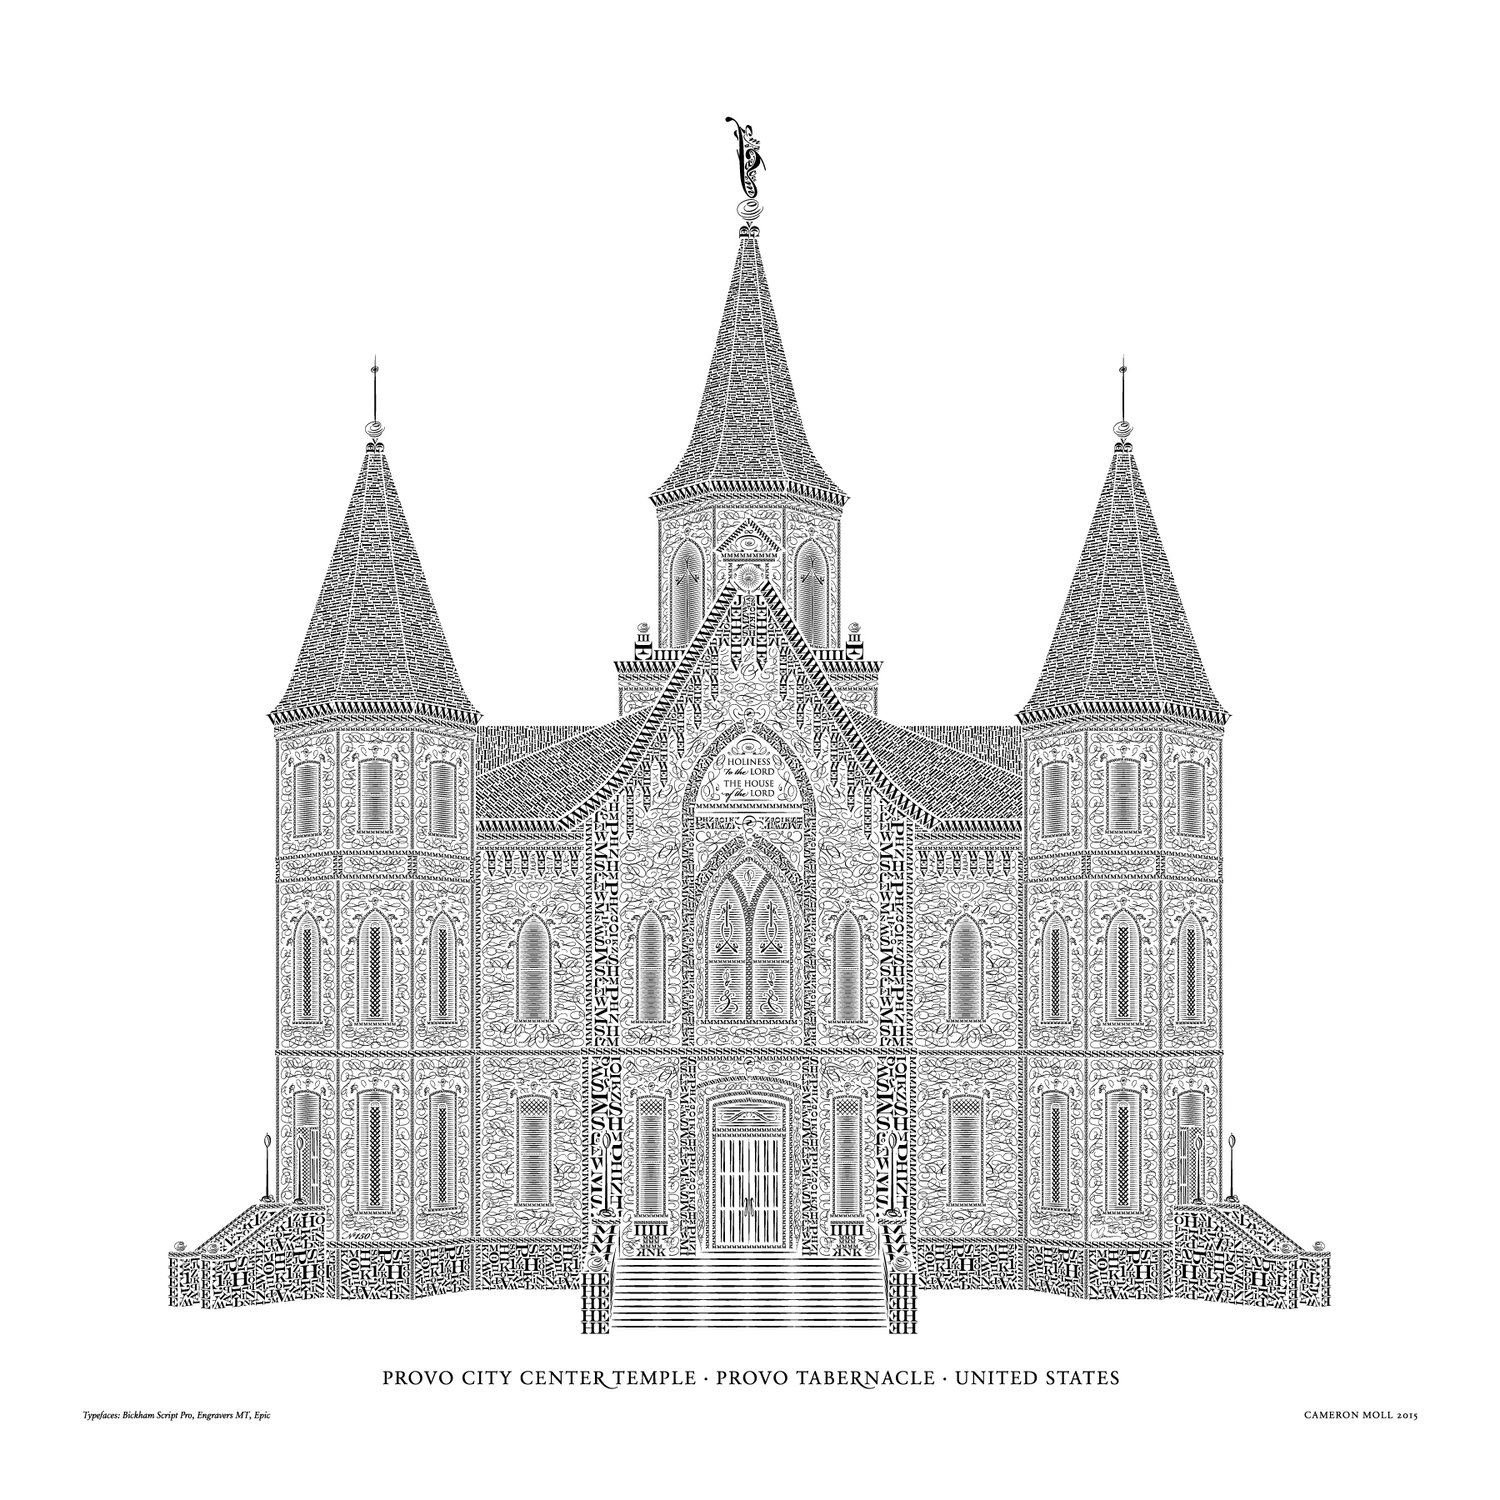 Image of Provo Tabernacle in Type